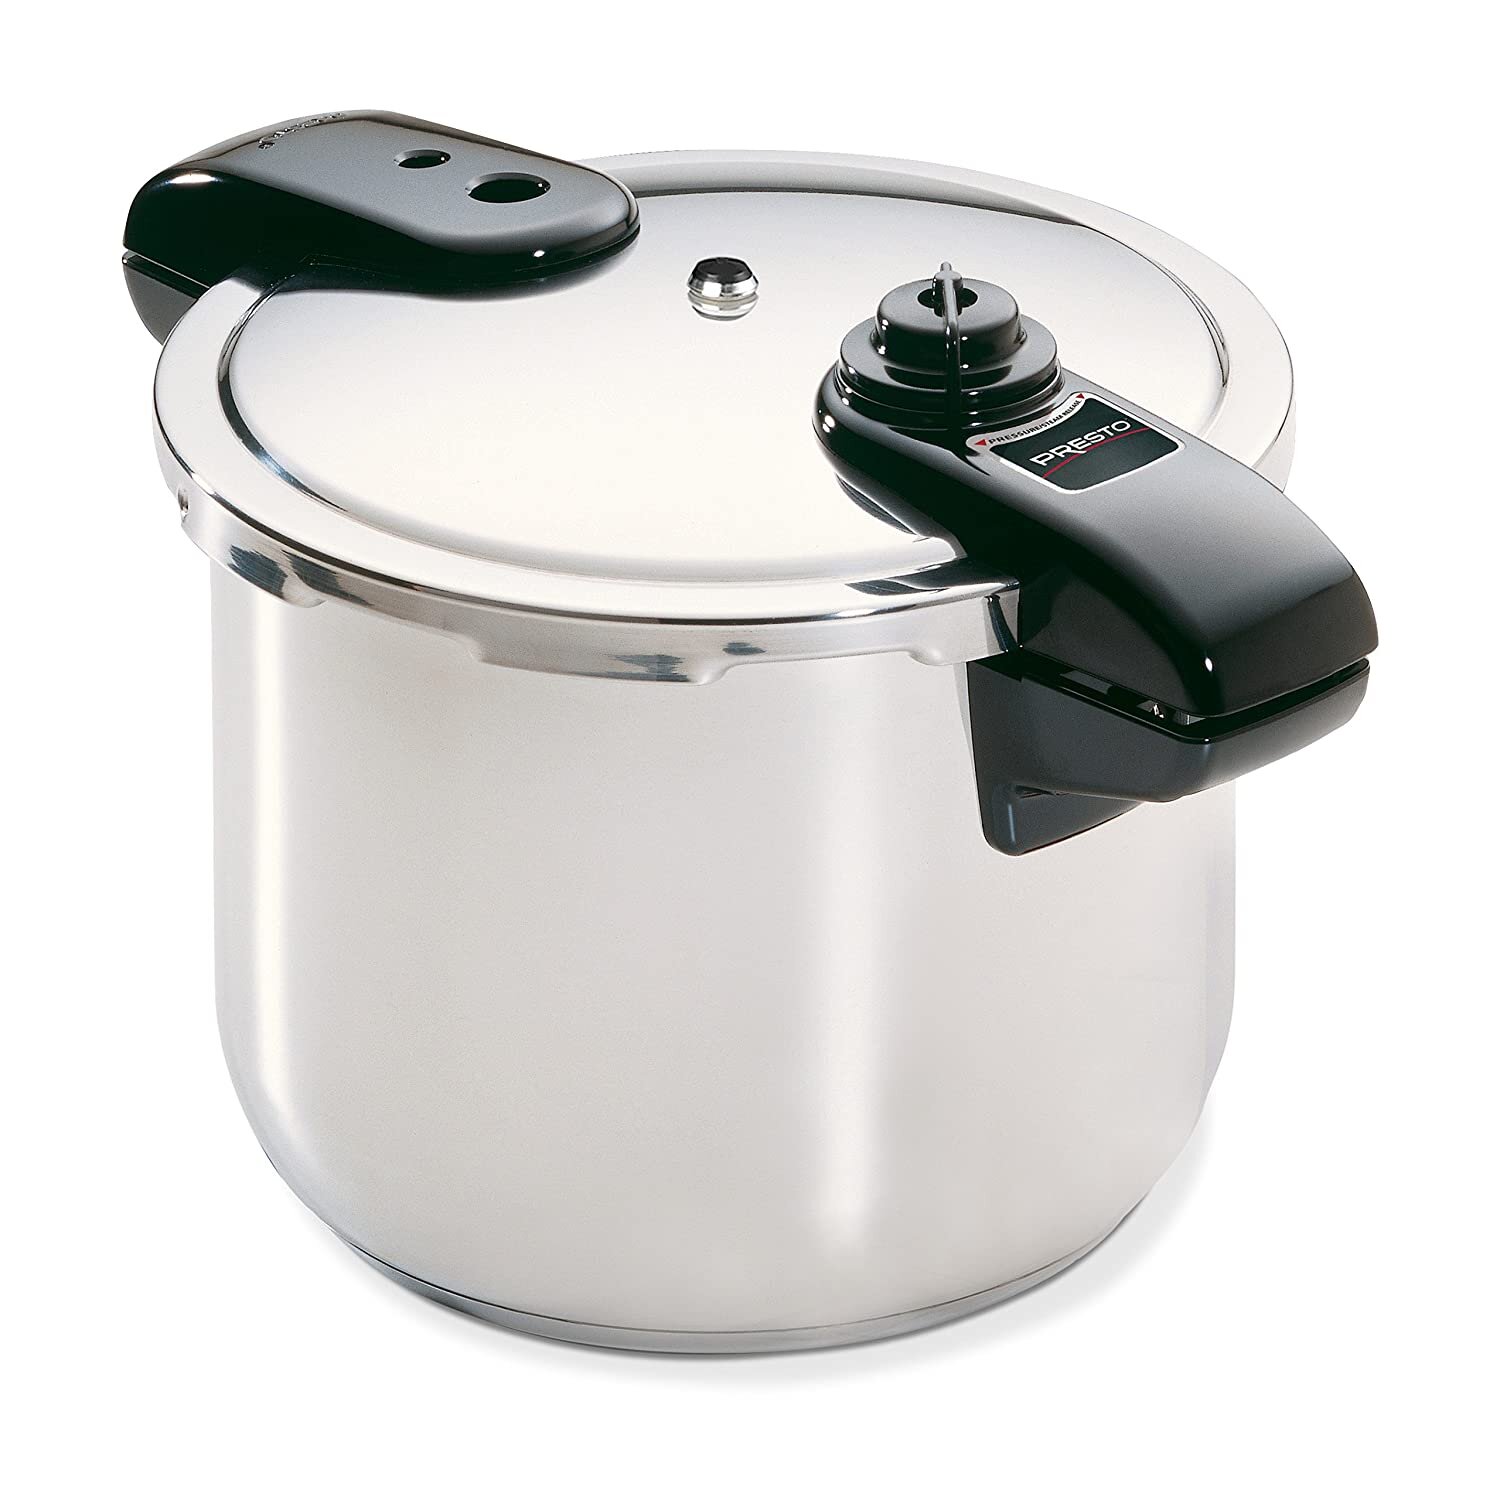 Presto 8 Qt. Stainless Steel Pressure Cooker - 01370 & Reviews